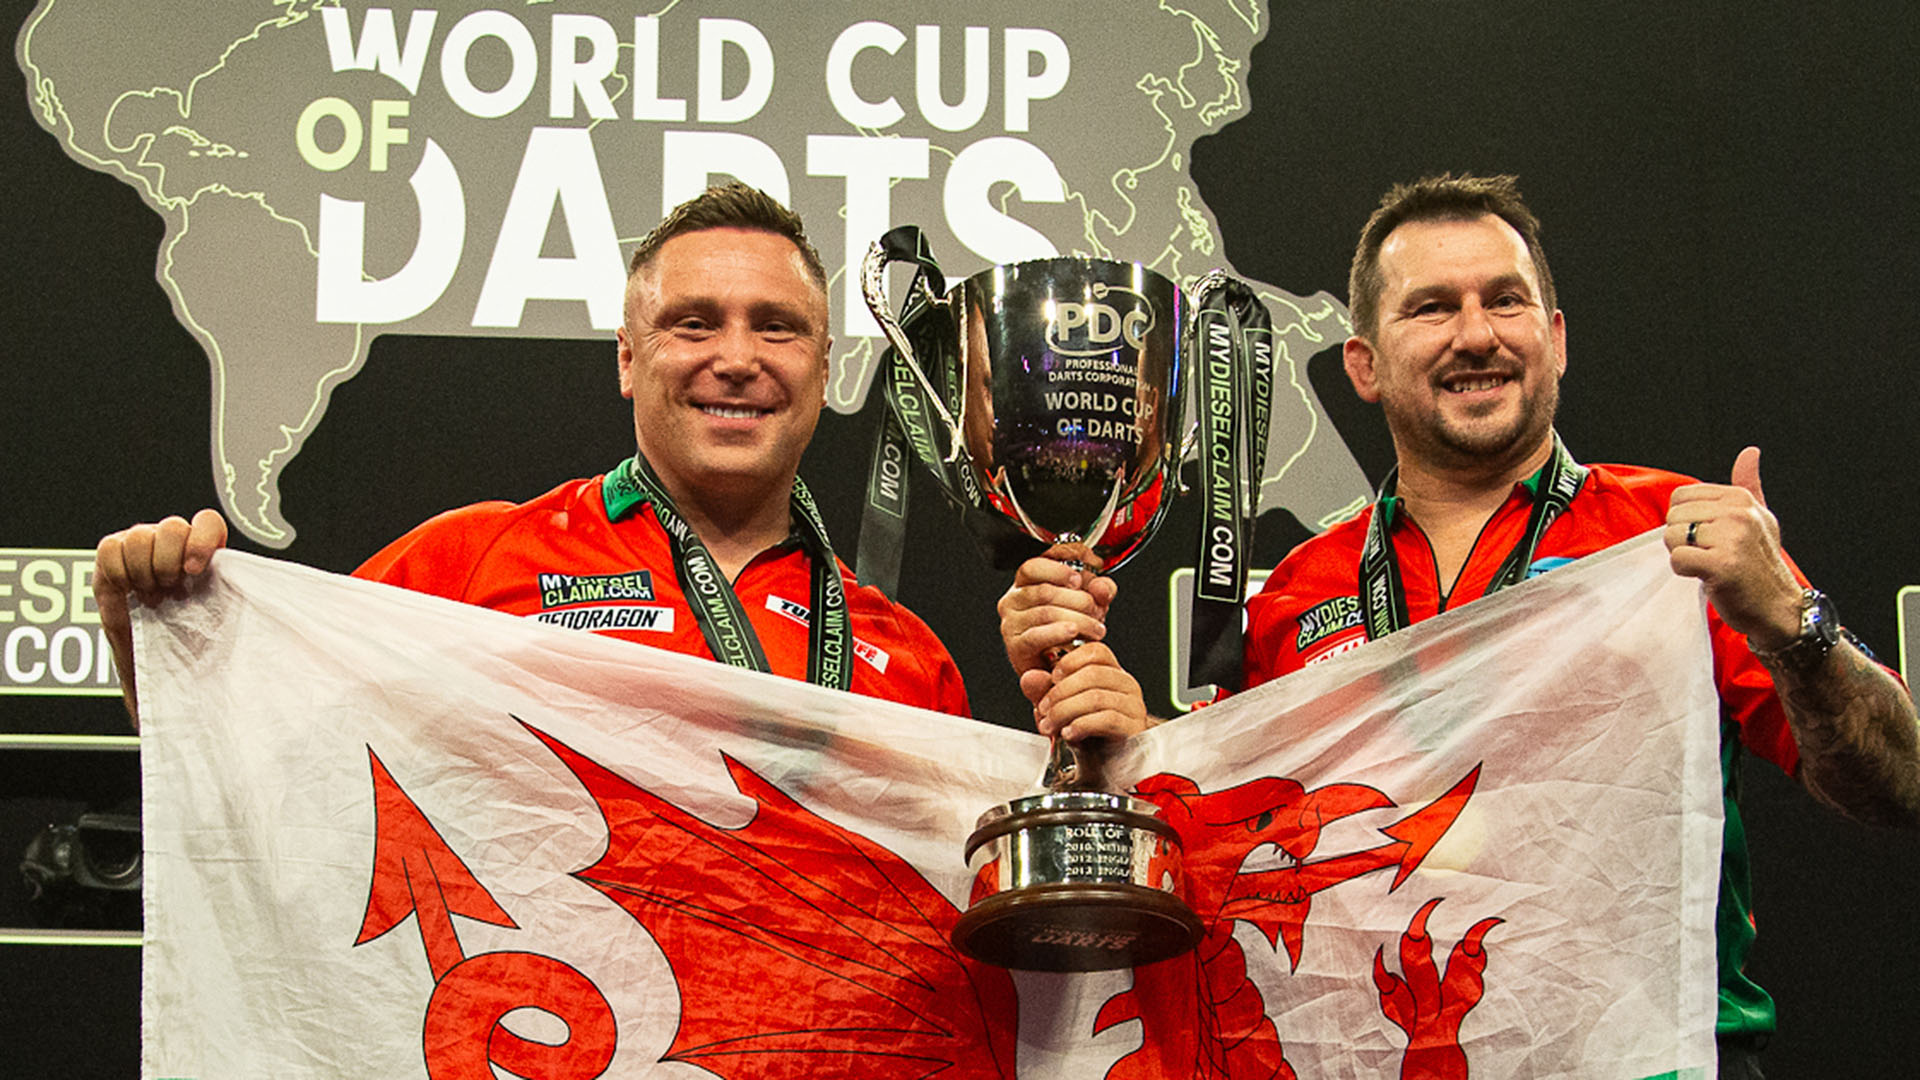 Darts results: Gerwyn and Jonny Clayton win Cup of Darts for Wales after beating Scotland in the final